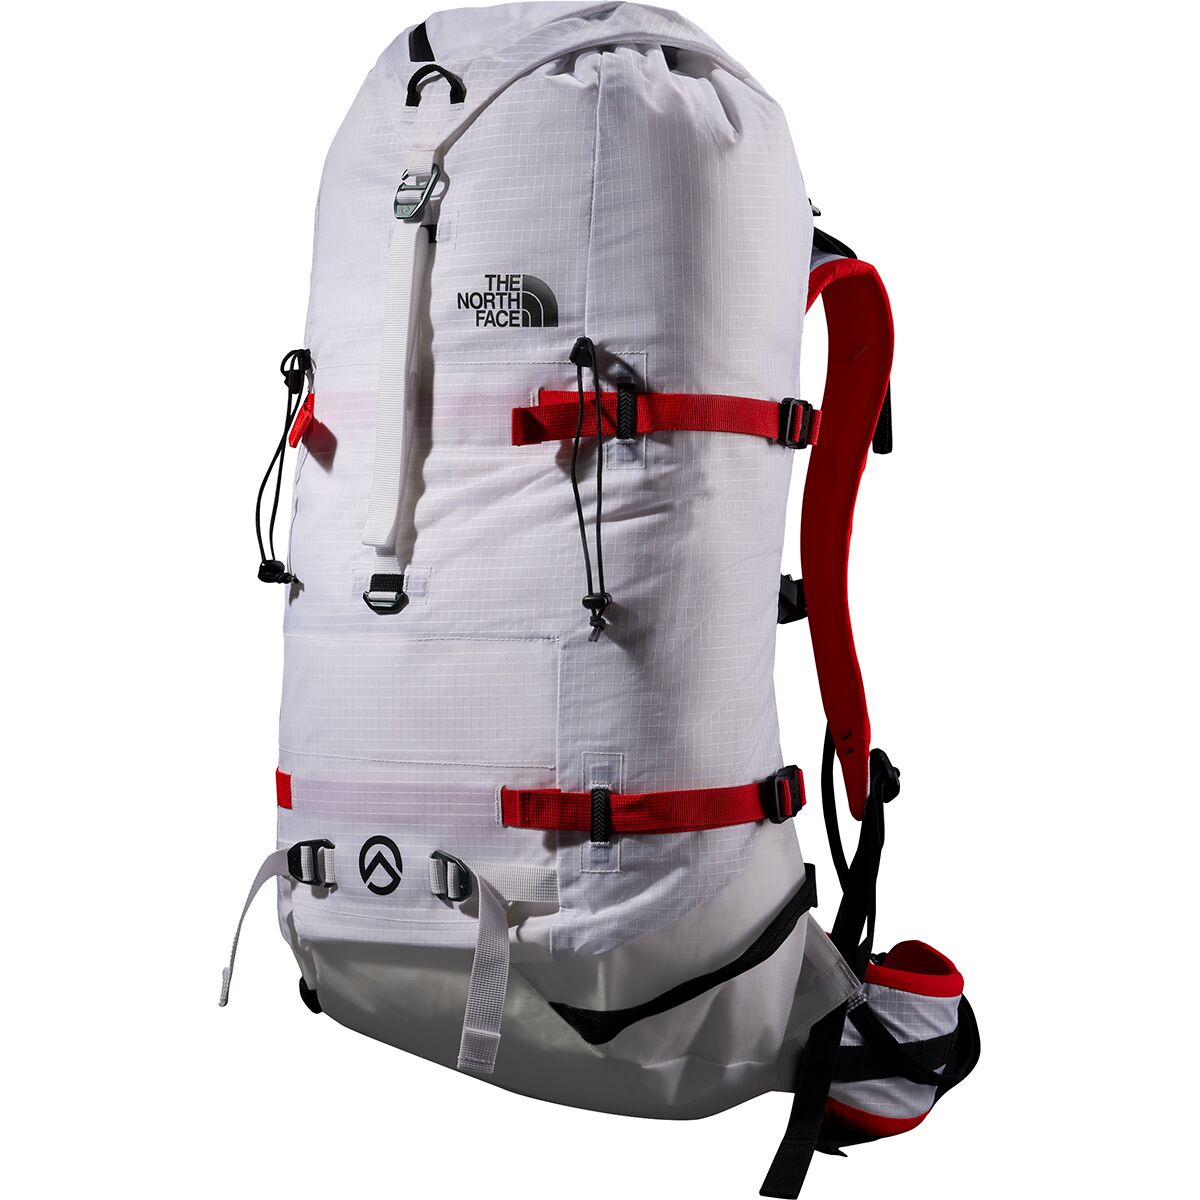 The North Face Phantom 38L Backpack